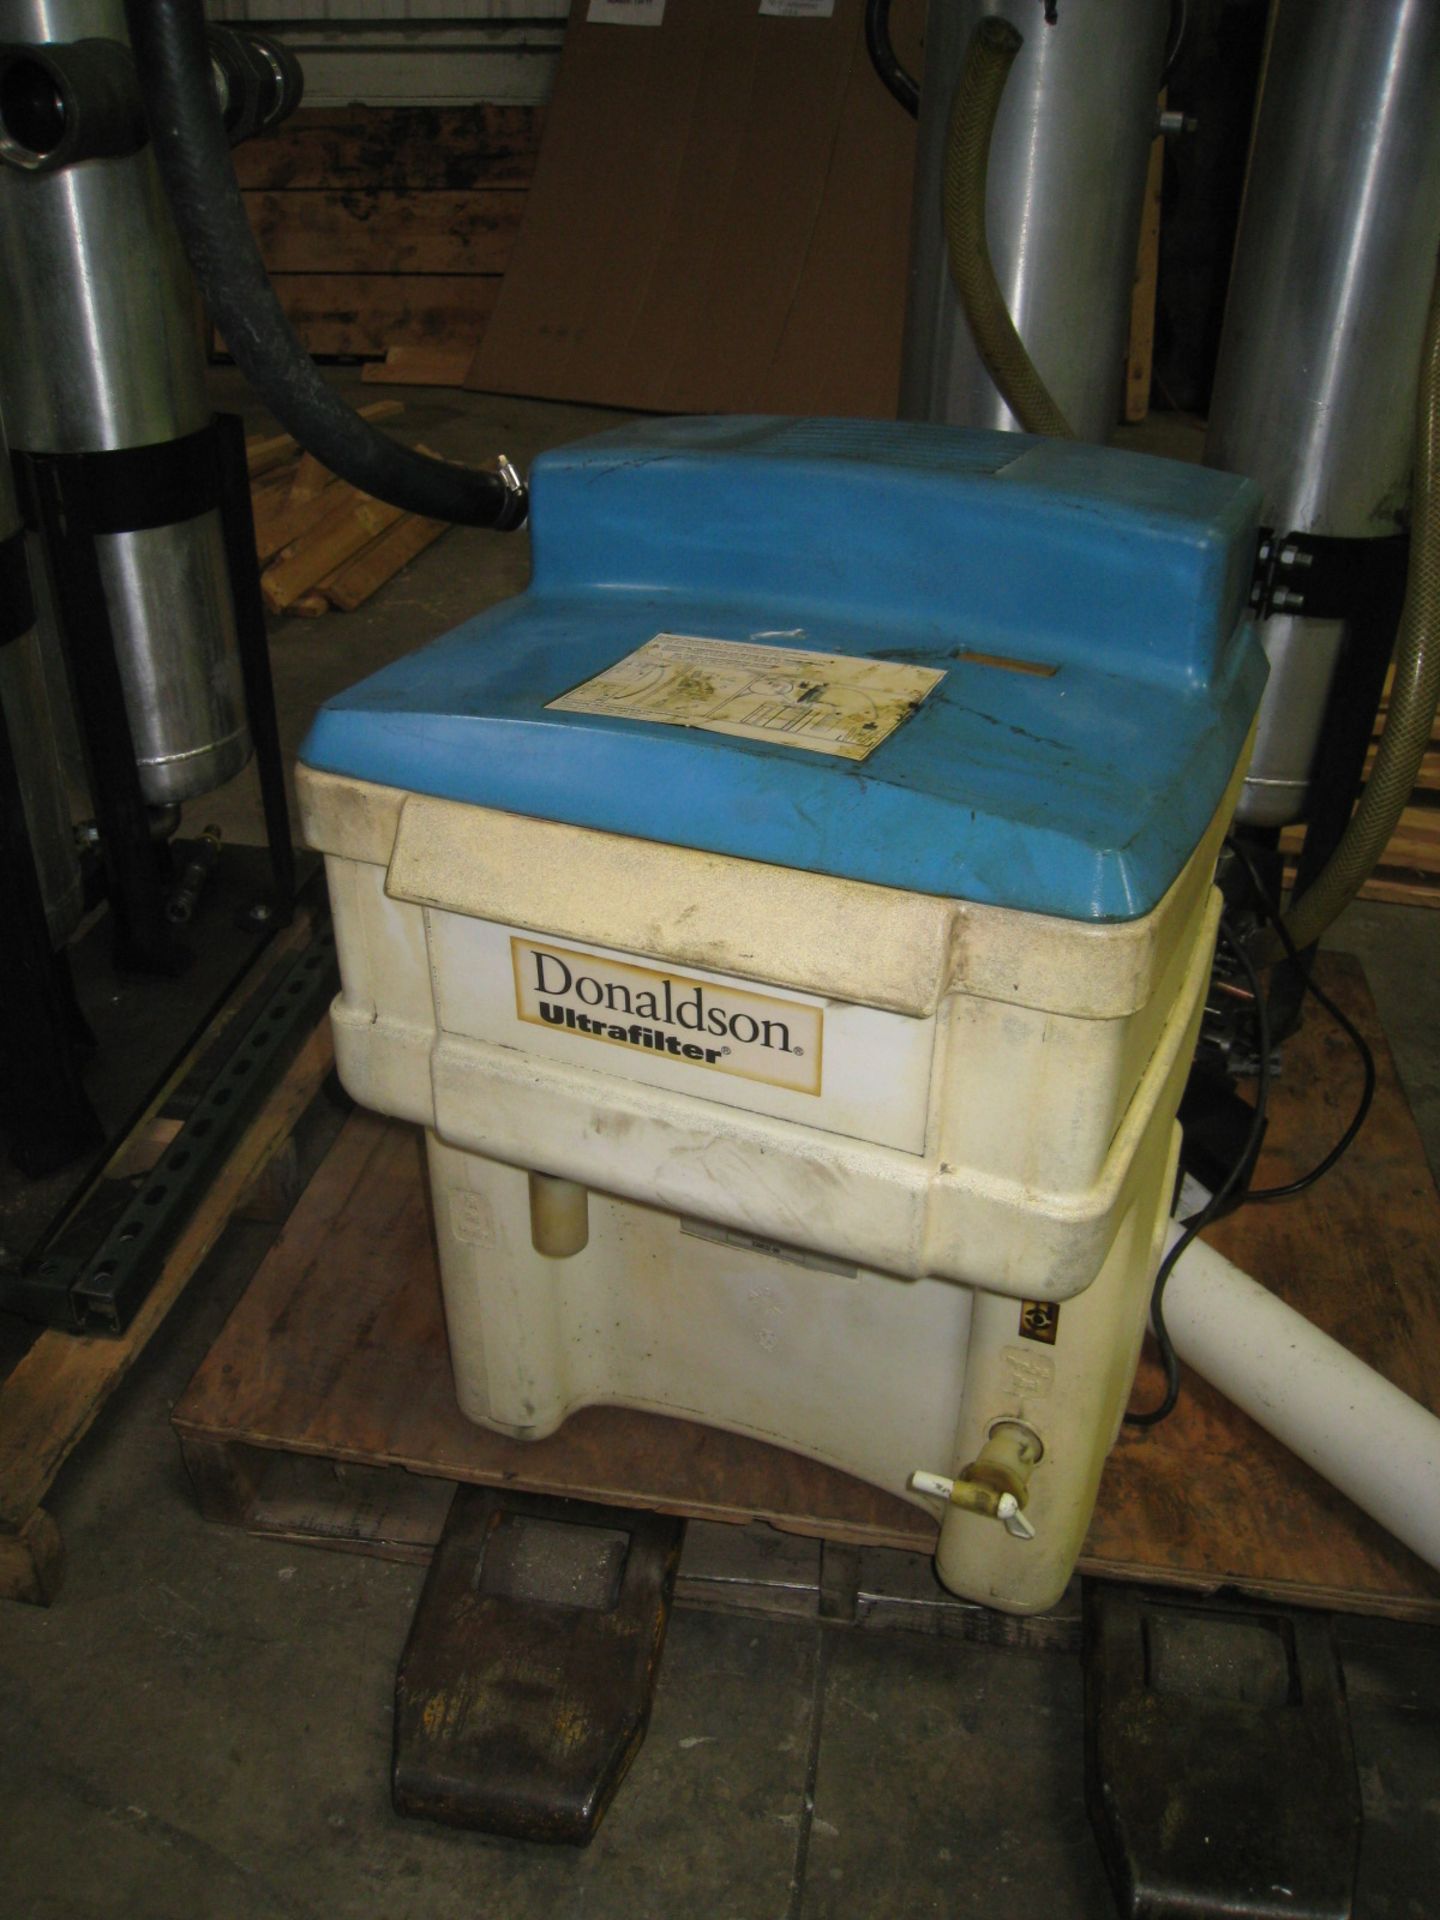 Donaldson Ultra Filter USF-SP-15 Oil/Water Separator For Condensate Purification S/N U-17156, New 20 - Image 2 of 2